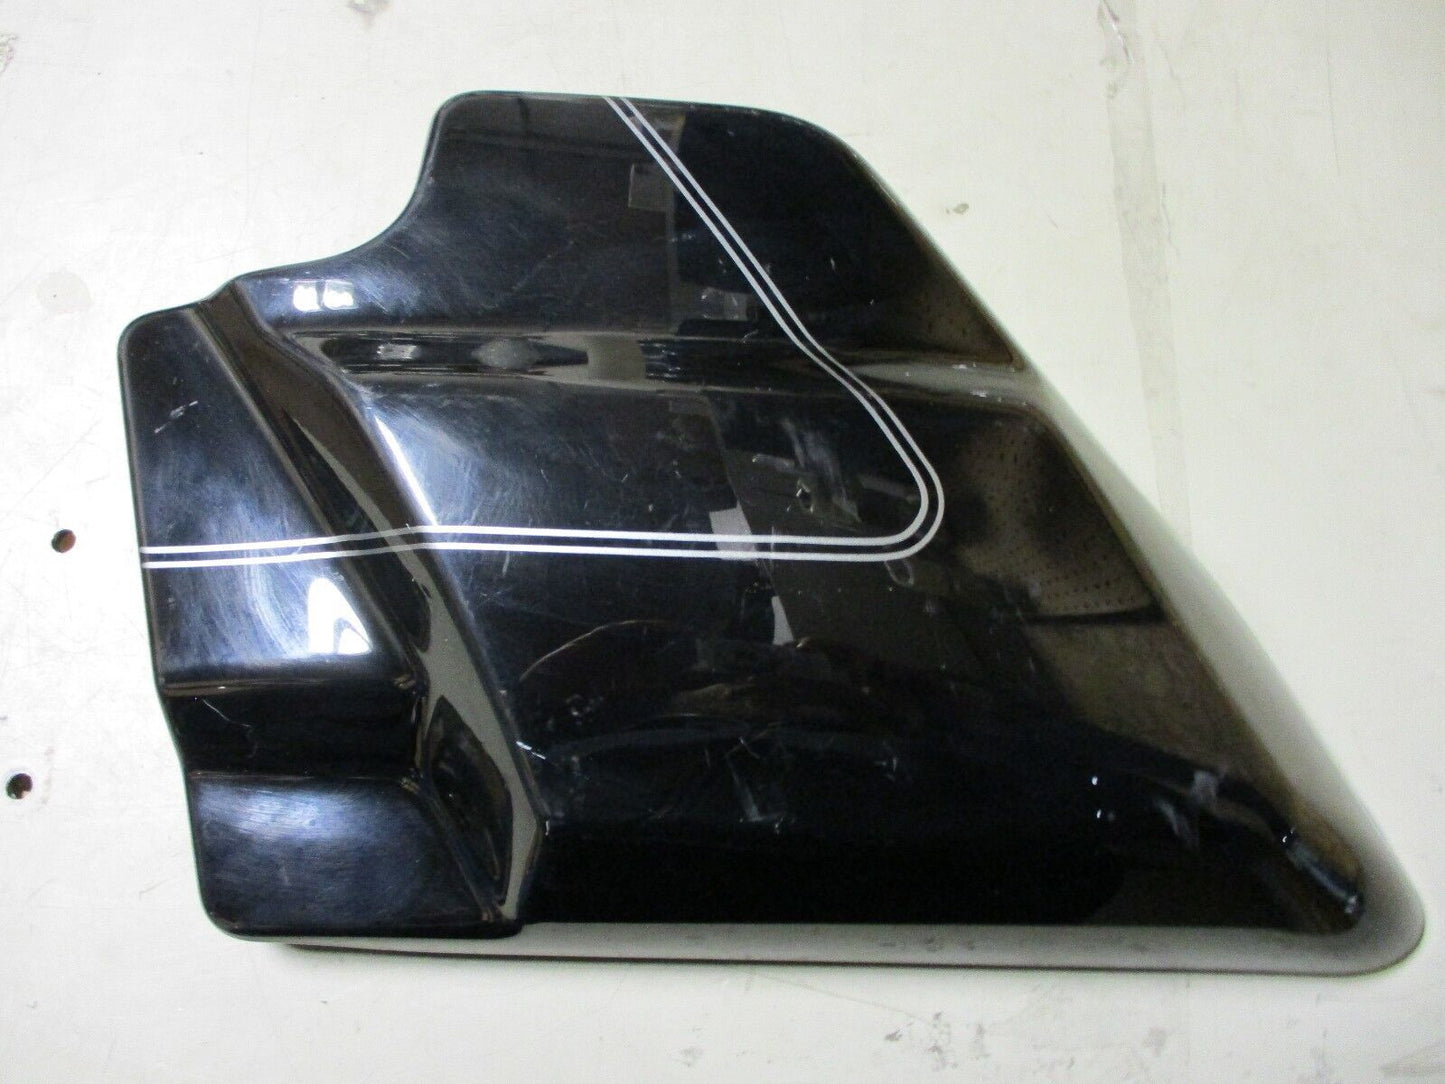 LEFT SIDE COVER FOR 2009 AND LATER HARLEY-DAVIDSON TOURING MODELS - 66250-09